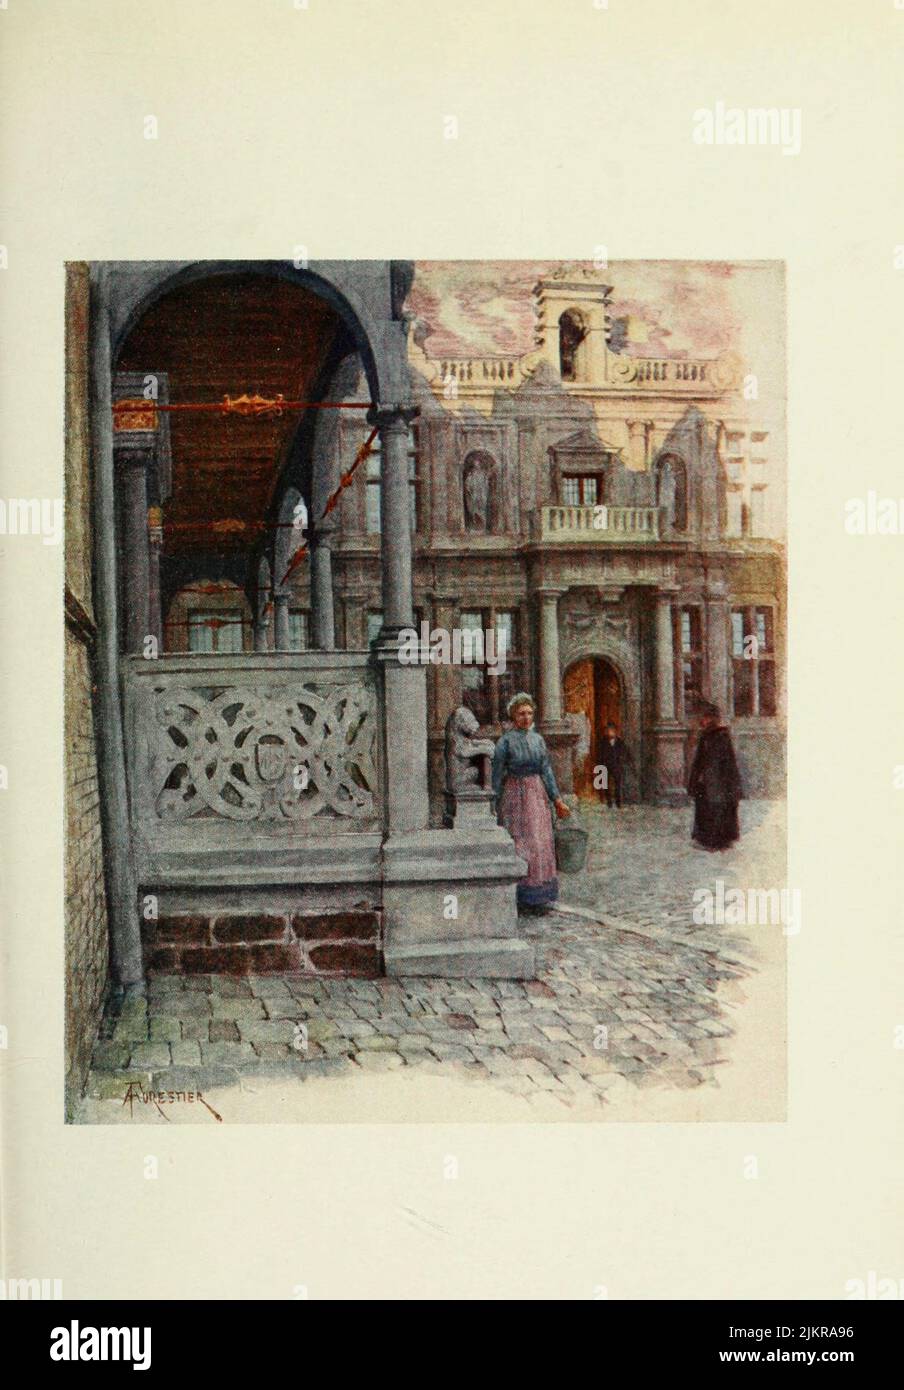 Furnes: Peristyle of Town Hall and Palais de Justice Painted by Amedee Forestier, from the book '  Bruges and West Flanders ' by George William Thomson Omond, Publication date 1906 Publisher London : A. & C. Black Sir Amédée Forestier (Paris 1854 – 18 November 1930 London) was an Anglo-French artist and illustrator who specialised in historical and prehistoric scenes, and landscapes. Stock Photo